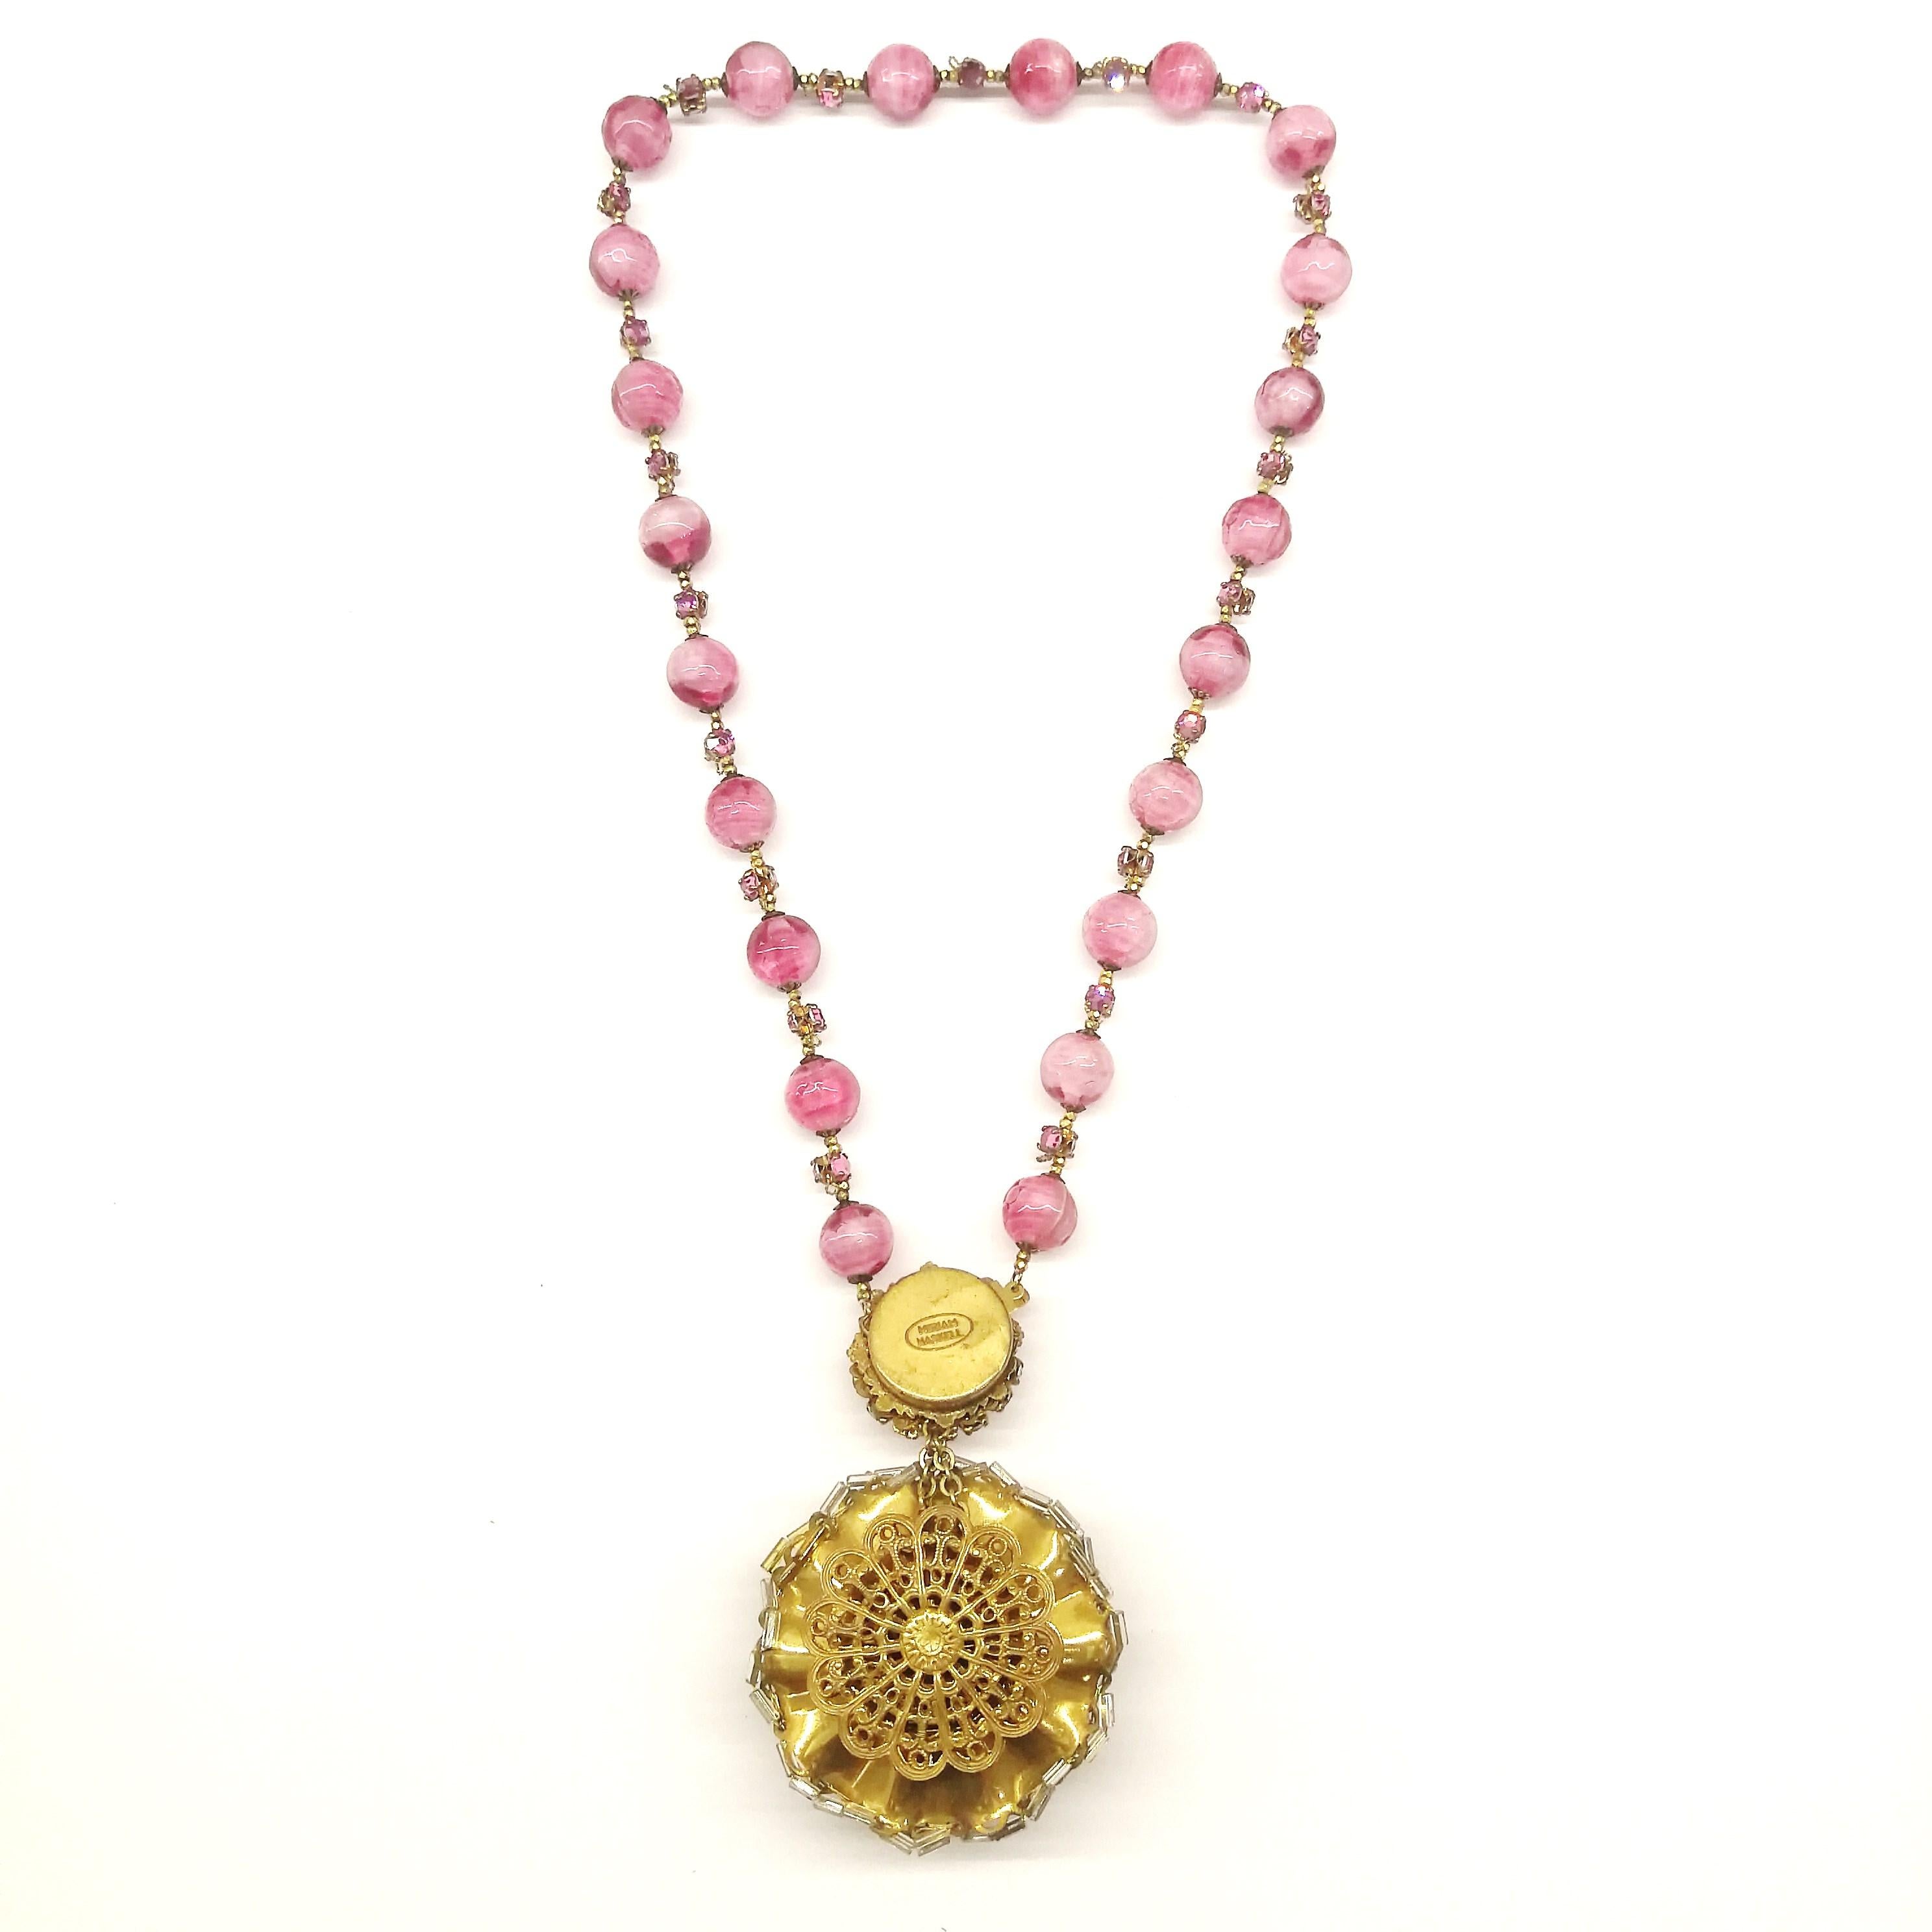 Paste 'rose montes' set between hand blown pink beads are very characteristic of Miriam Haskell jewellery, leading to a striking 'rosette' pendant, crowned in clear bugle beads, with a luscious pink bead at its centre. This lovely colour gives a